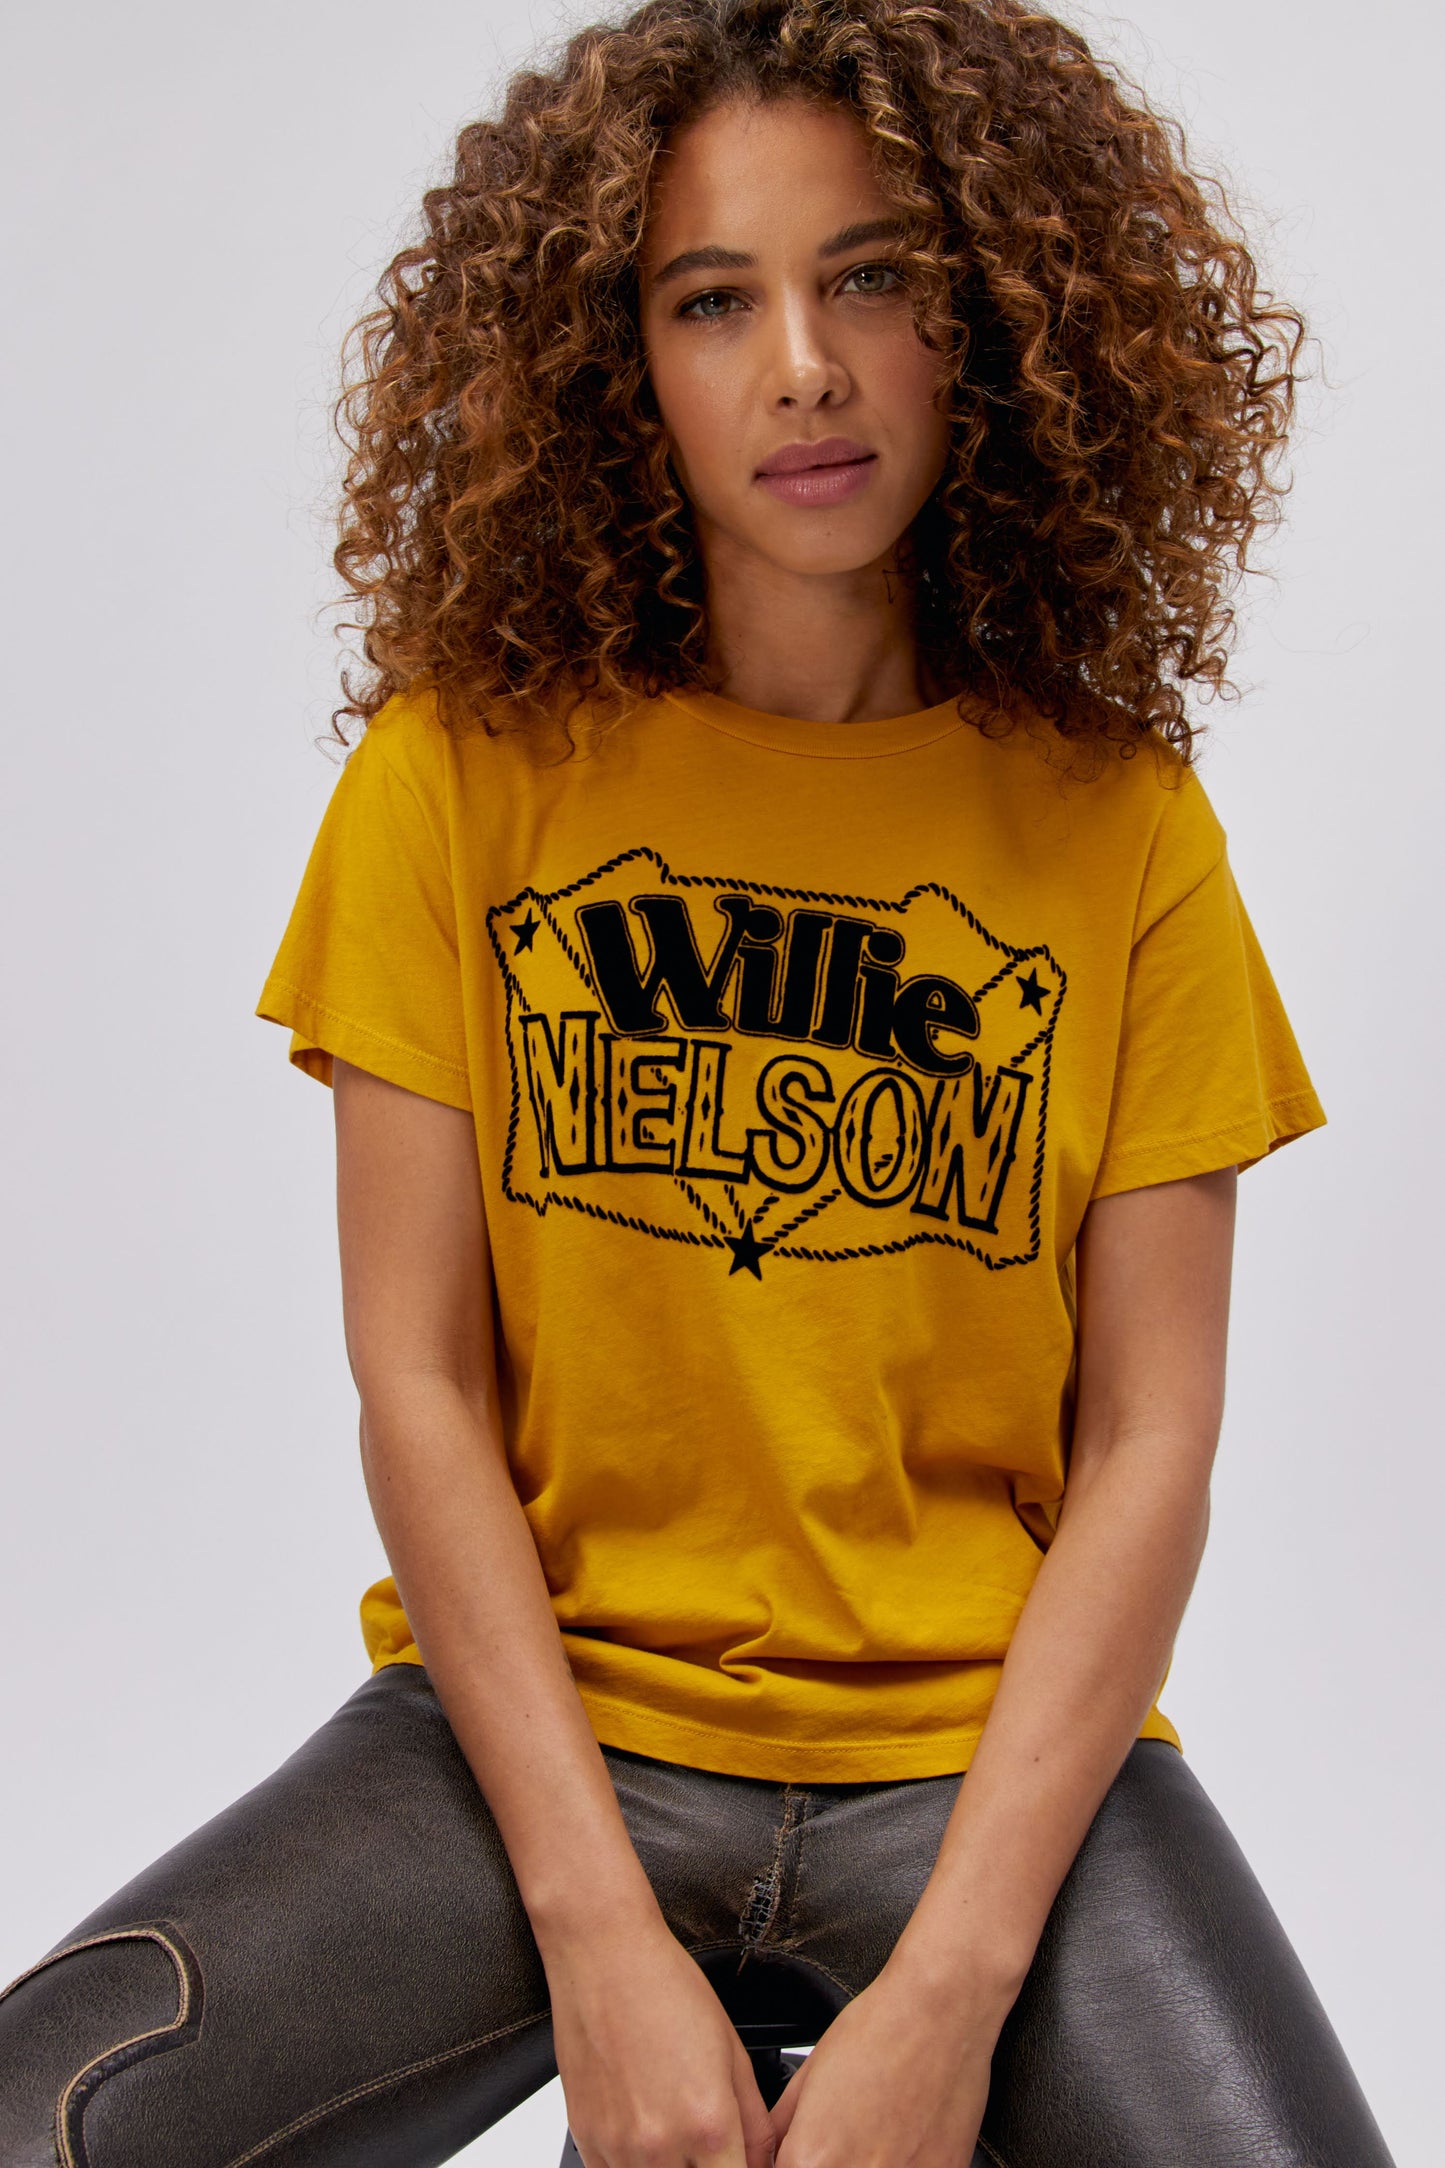 A curly-haired model featuring a golden daze tee stamped with 'Willie Nelson' in front and 'Genuine Outlaw Music' at the back.